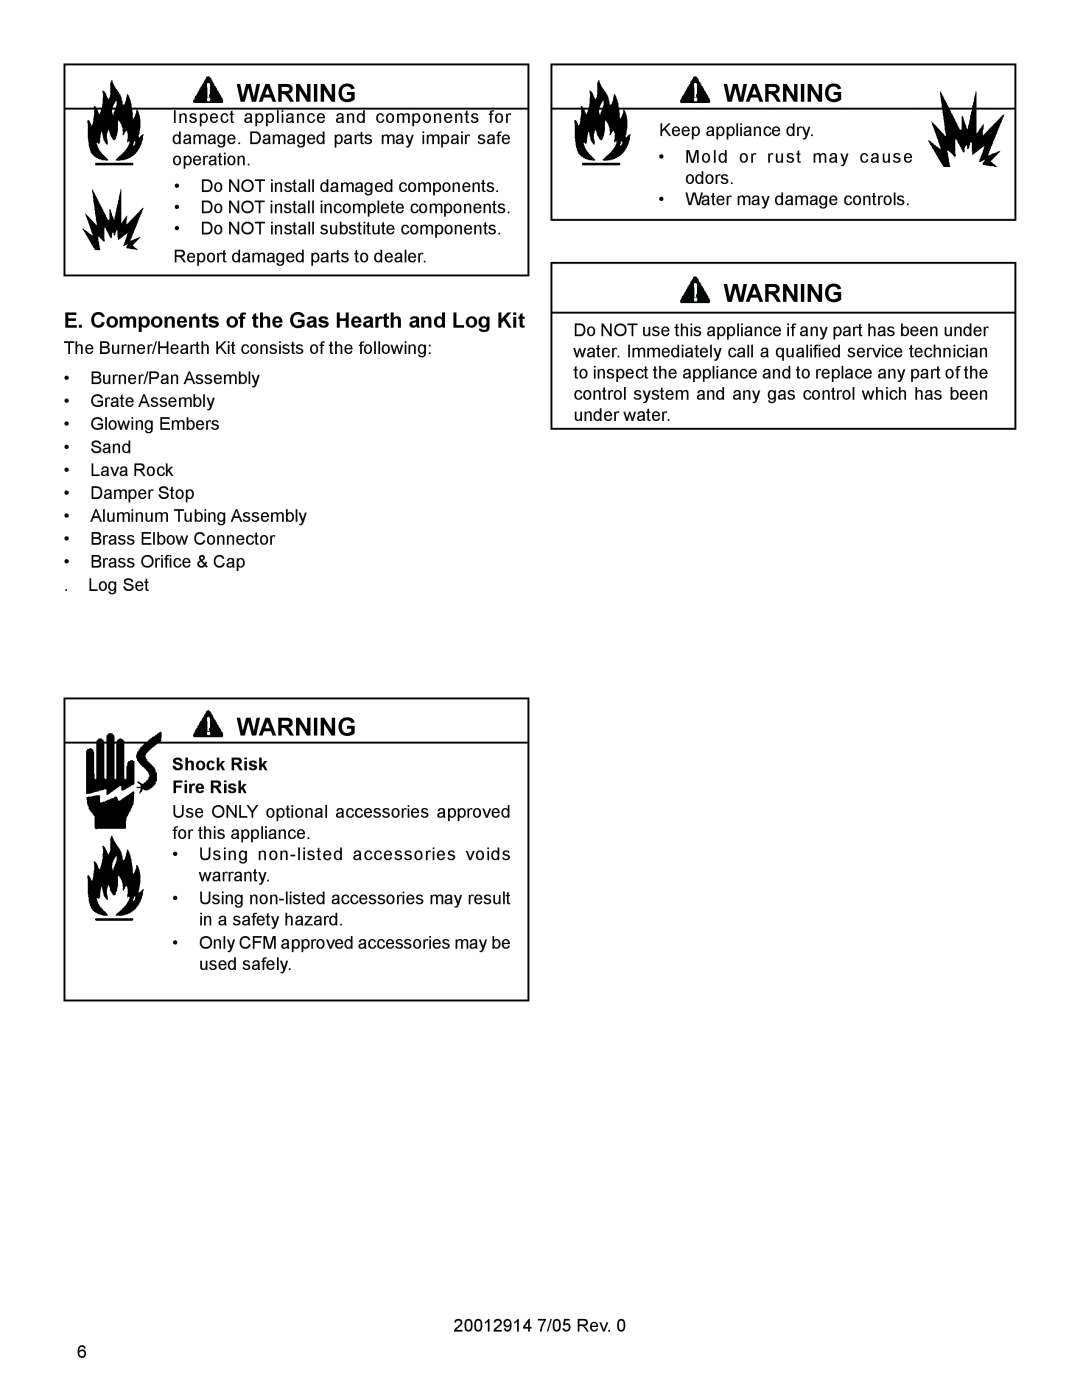 Vermont Casting MO18 installation instructions E. Components of the Gas Hearth and Log Kit, Shock Risk Fire Risk 